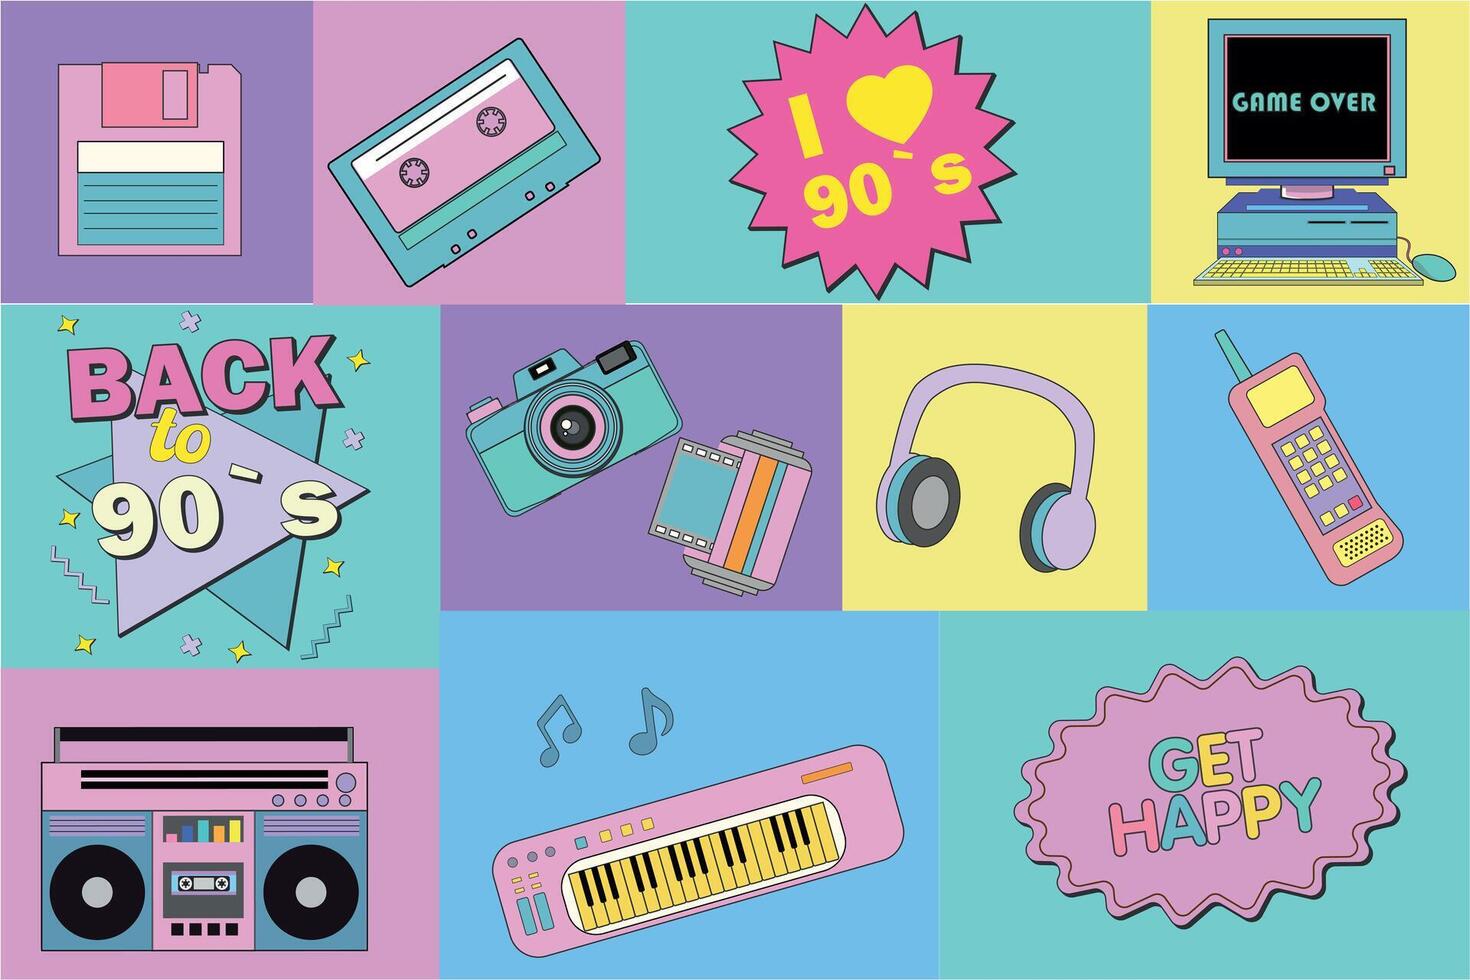 Set of colorful retro elements 80s 90s. Collection of 90s elements old pc, phone, audio player, cassette, CD, floppy disk, roller skate. Geometric poster in pop art style. Retro set of 80s 90s vector